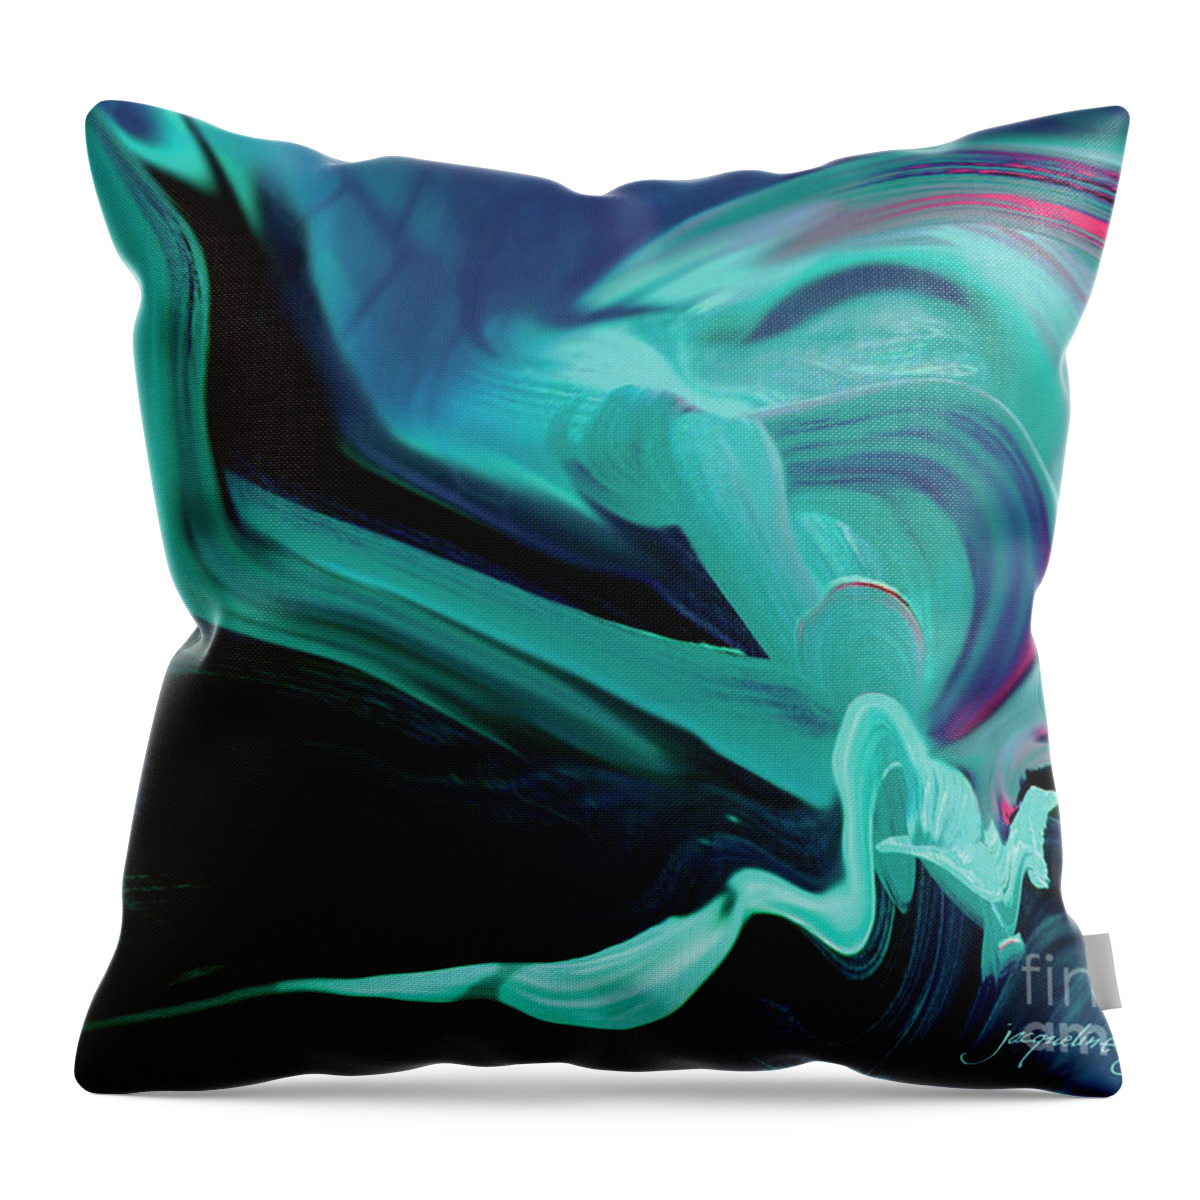 Abstract Throw Pillow featuring the digital art Creativity by Jacqueline Shuler